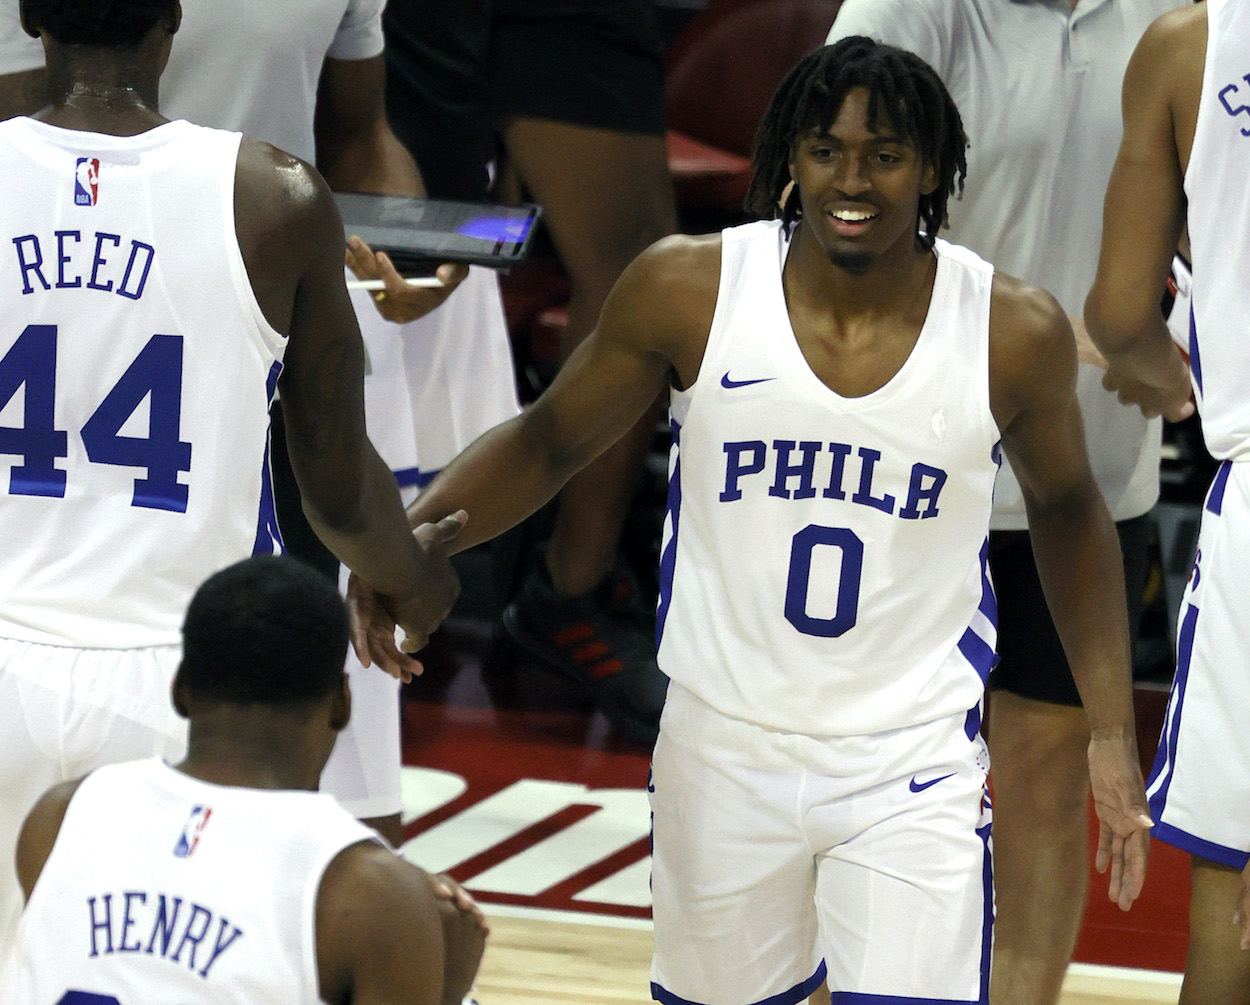 Tyrese Maxey of the Philadelphia 76ers greets teammates on the court during a timeout in their game against the Dallas Mavericks during the 2021 NBA Summer League at the Thomas & Mack Center on August 9, 2021 in Las Vegas, Nevada. The Sixers defeated the Mavericks 95-73.